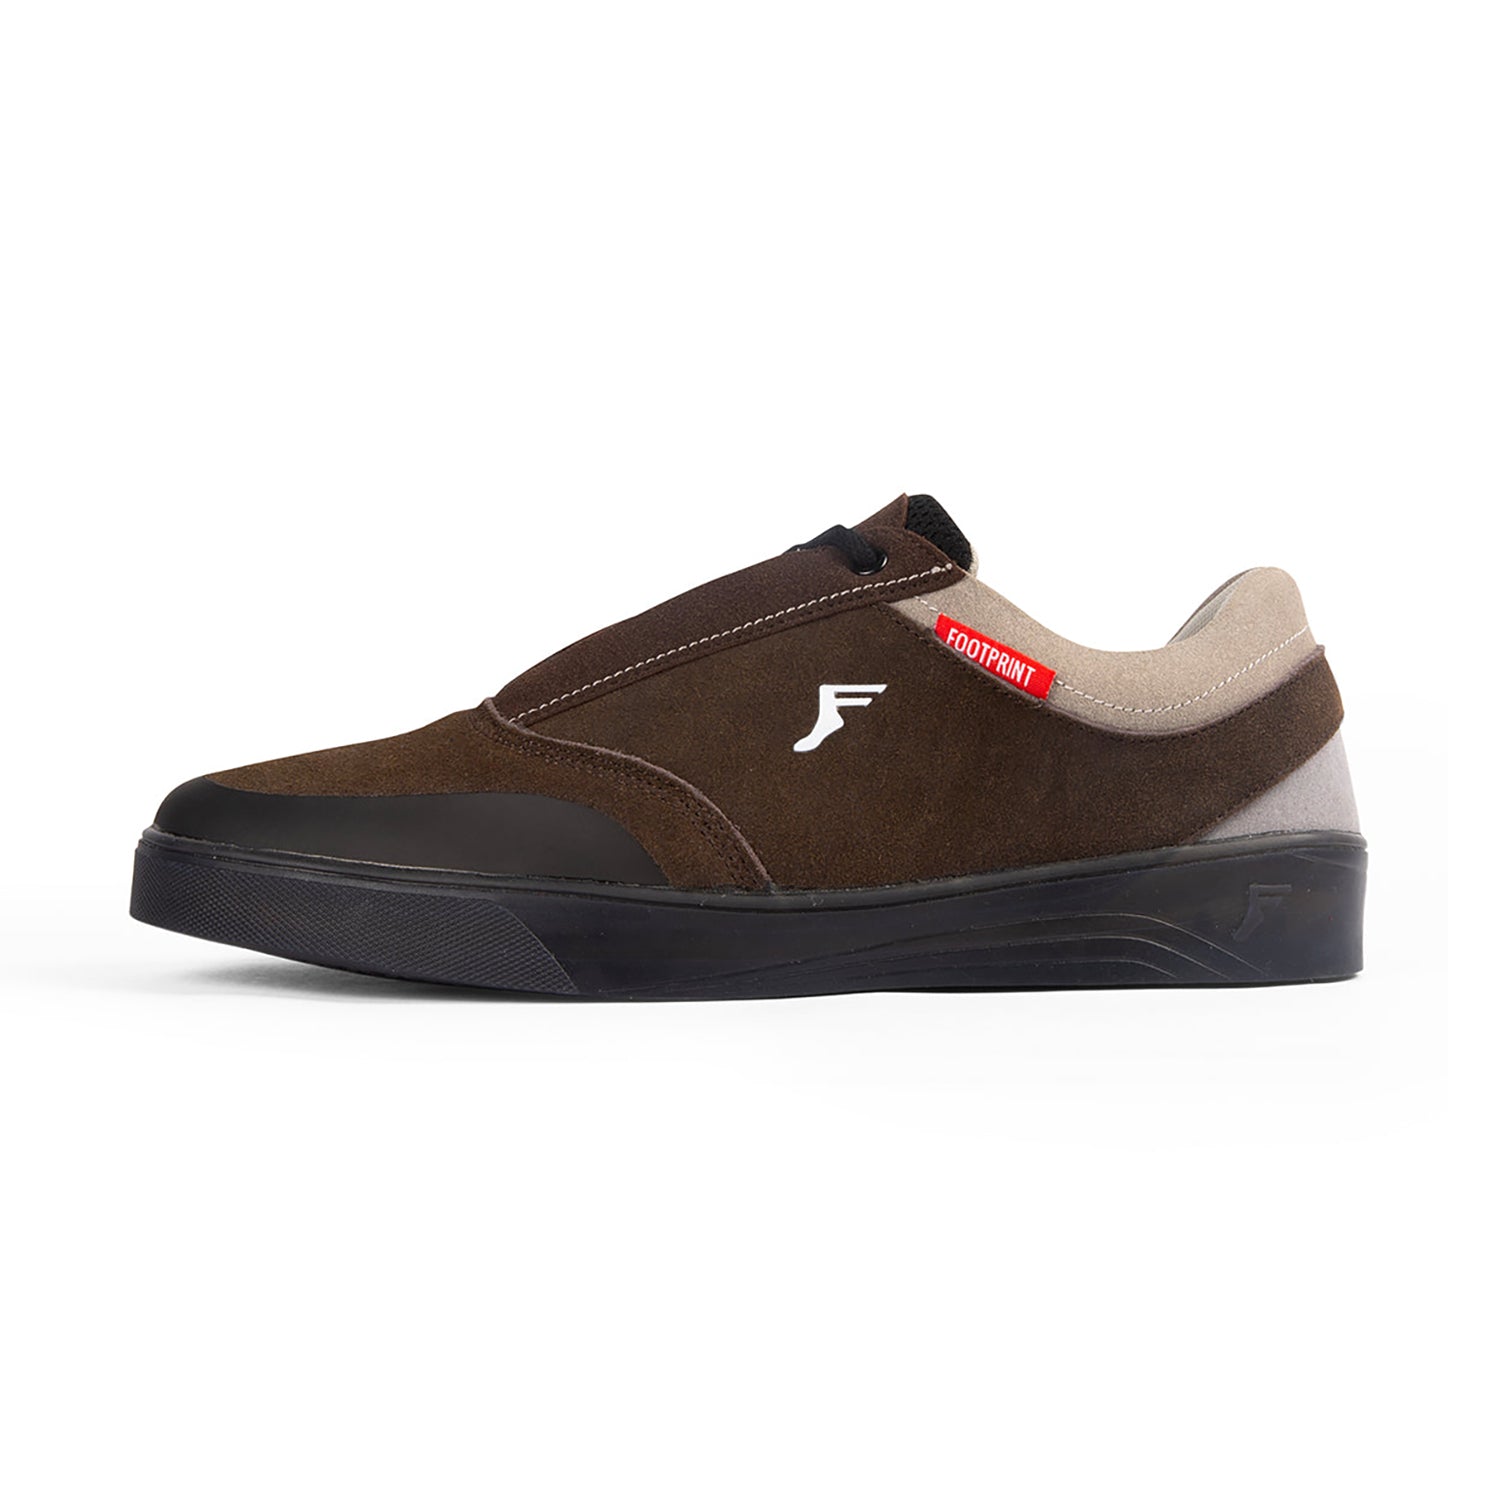 brown fp footprint shoes with black sole 